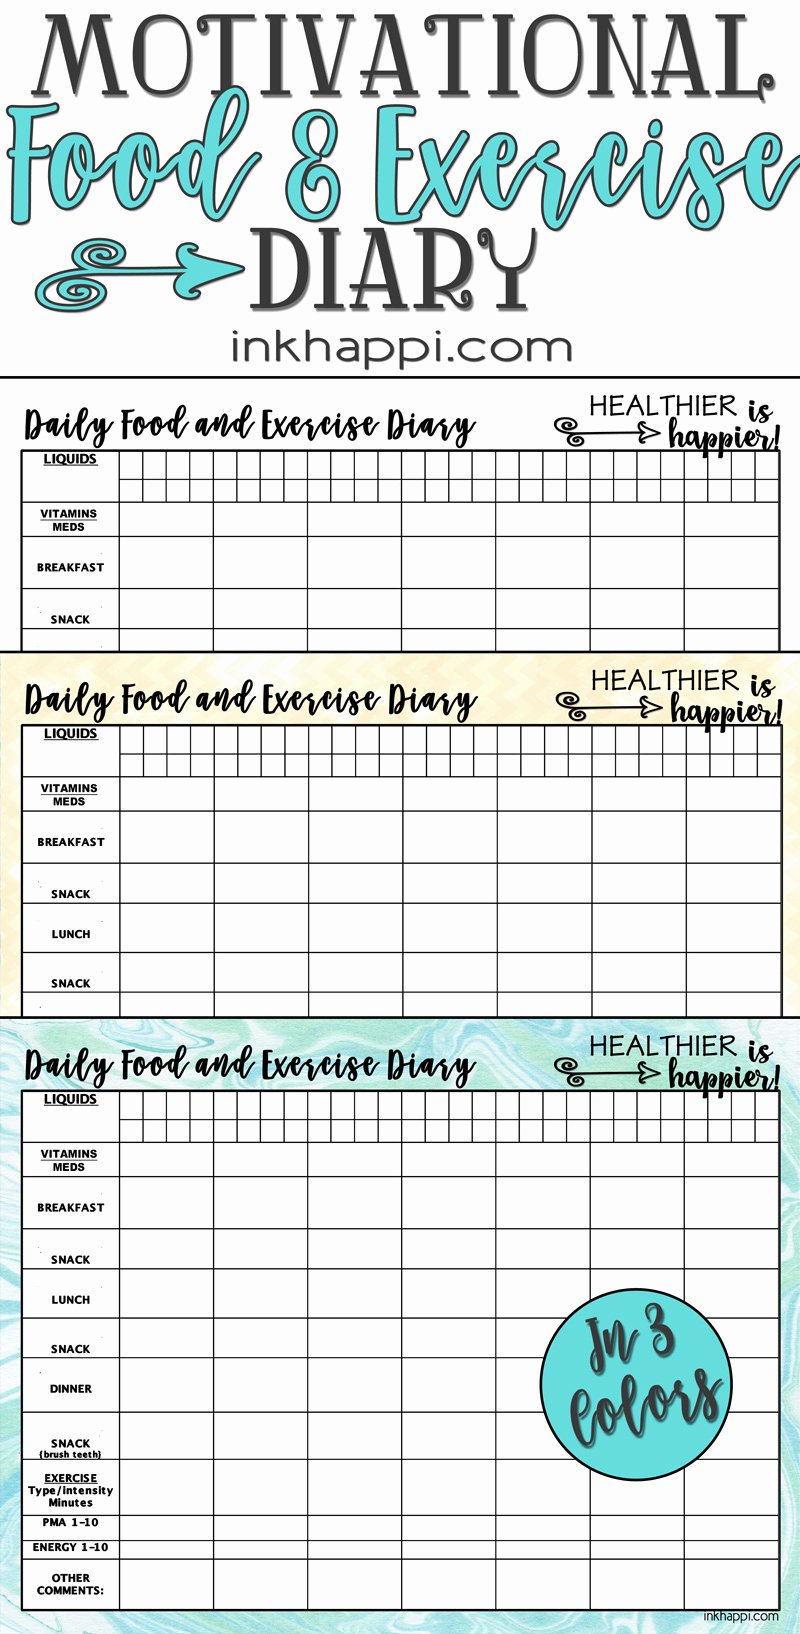 Daily Food Journal Printable New Motivational Food and Exercise Diary Free Printable